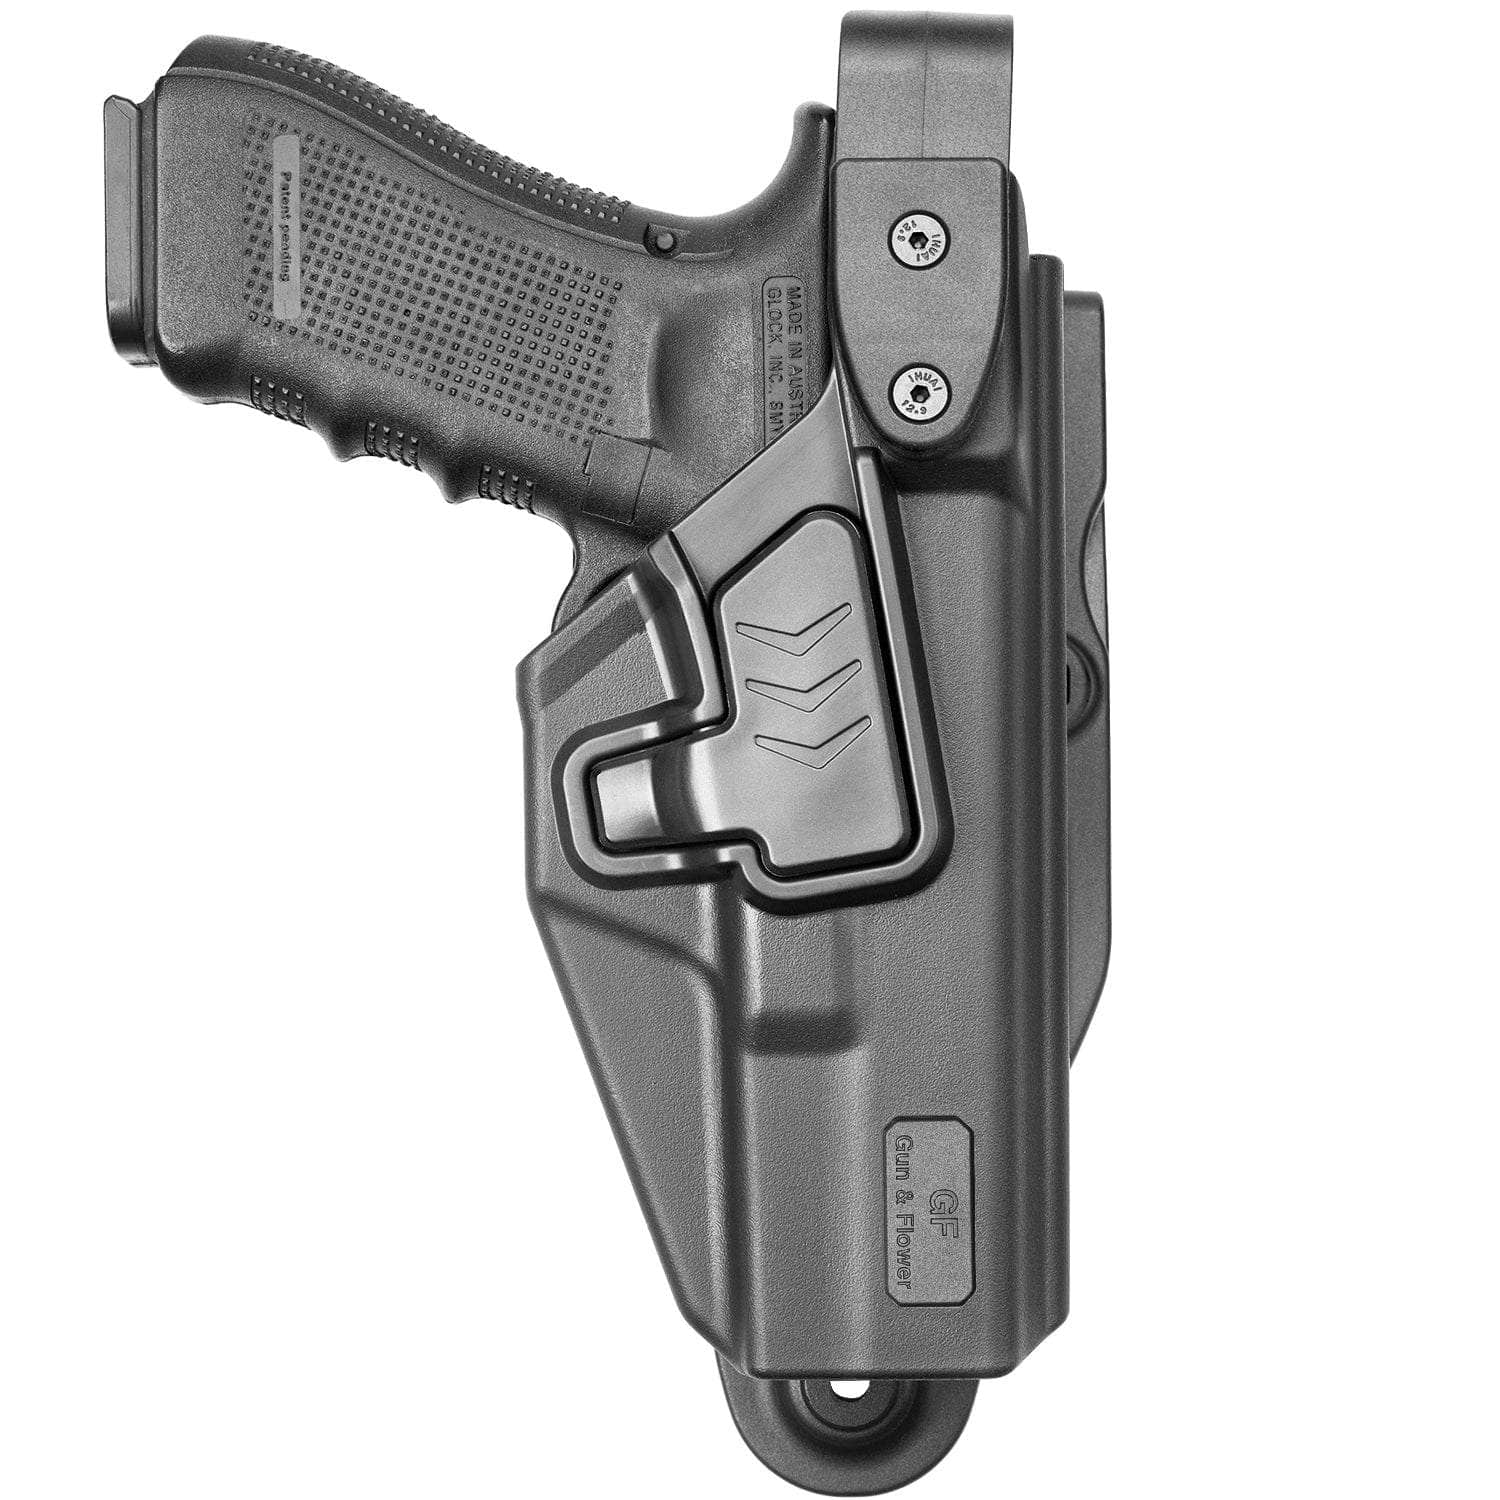 Blackhawk Level 3 Tactical Serpa Holster, Fits Glock 17/19/22/23/31/32,  Right Hand